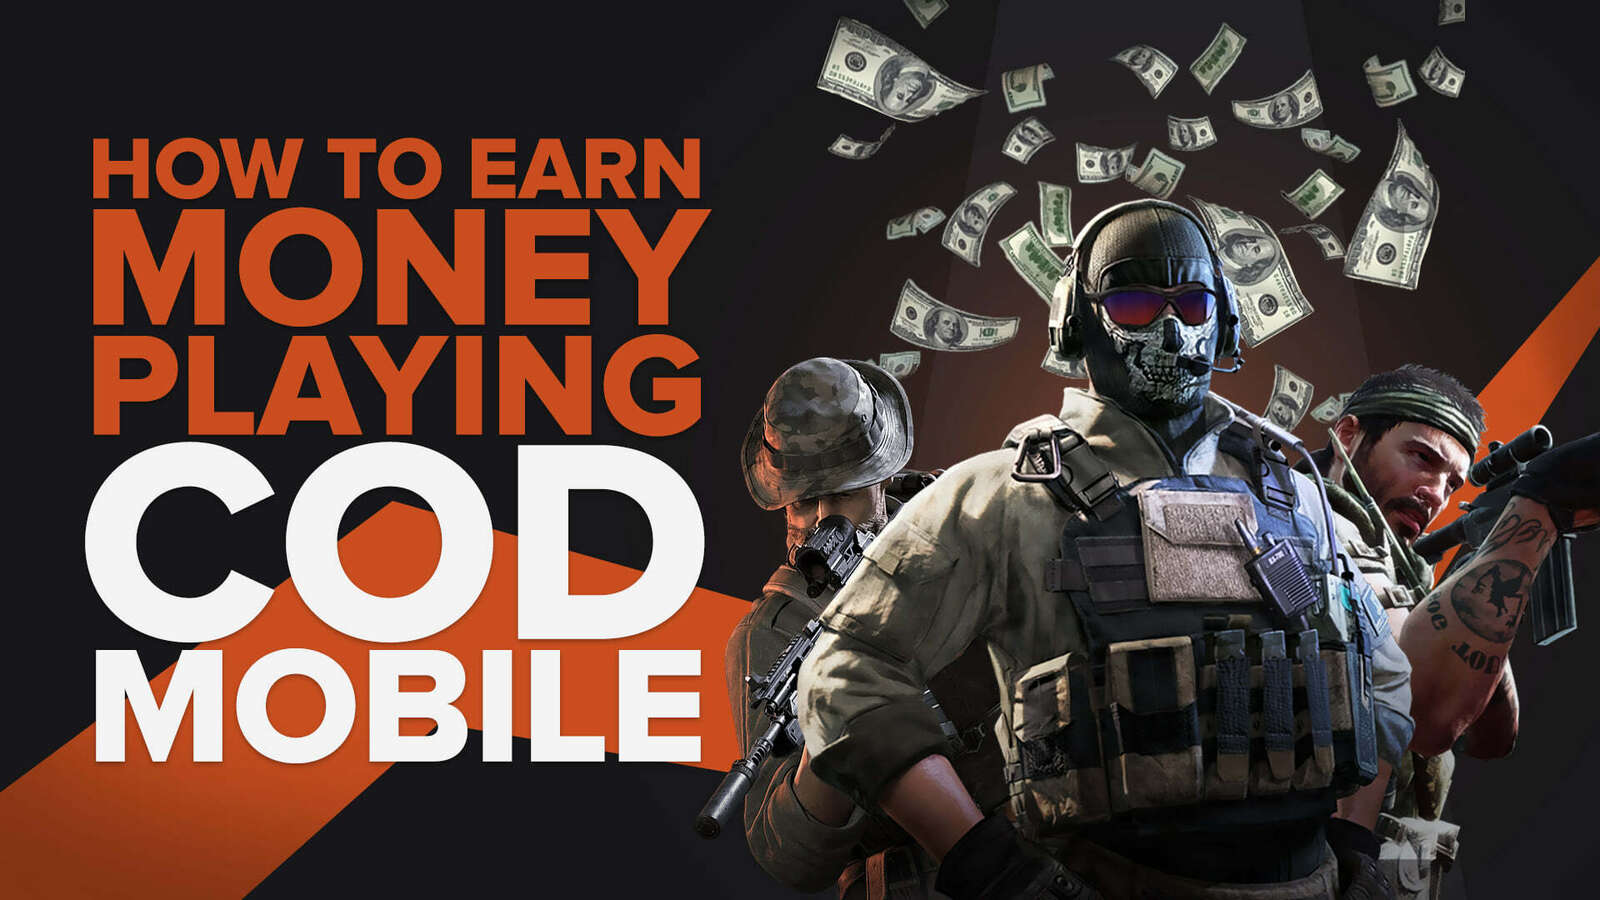 6 Ways to Earn Money by Playing COD Mobile